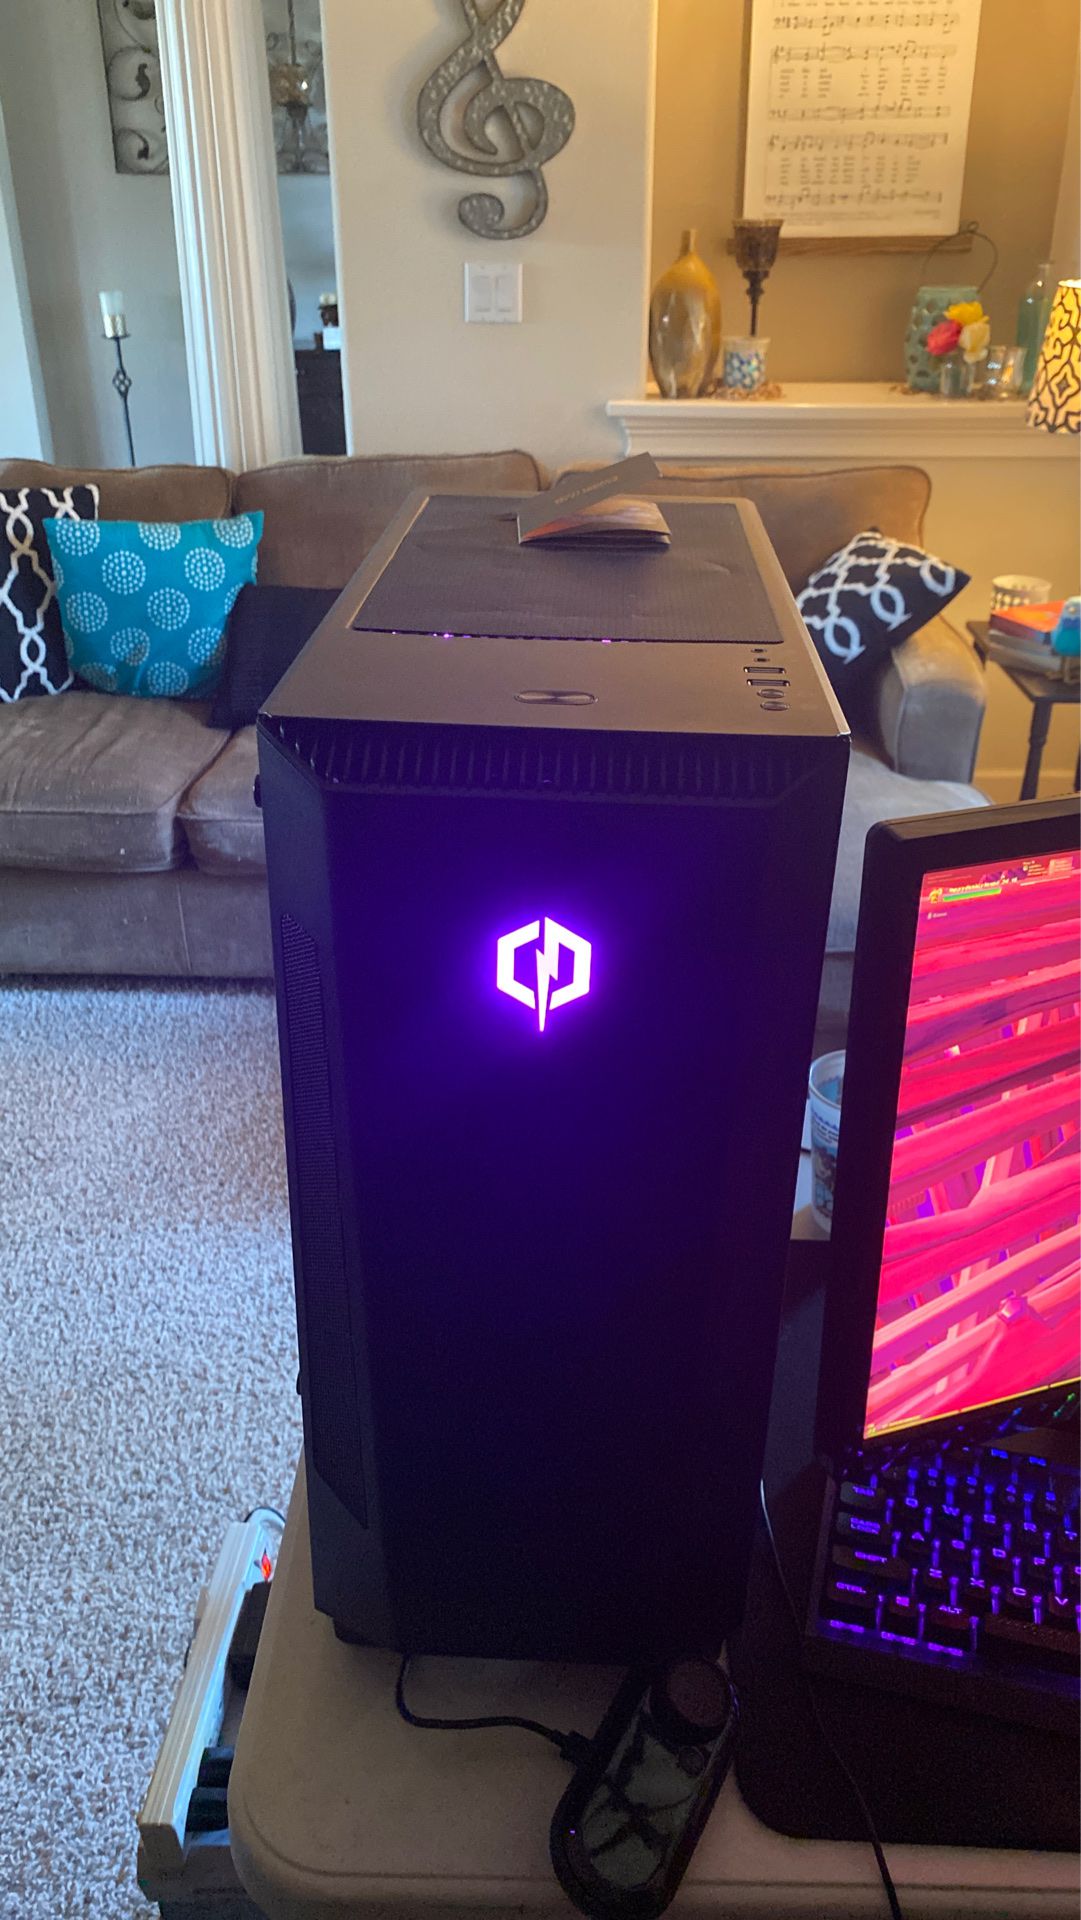 CYBERPOWER gaming pc SPECS: ryzen 3 quad core cpu Radeon rx 580 4gb graphics card 1 Tb of storage 8 gb of ram and two rgb fans selectable colors and